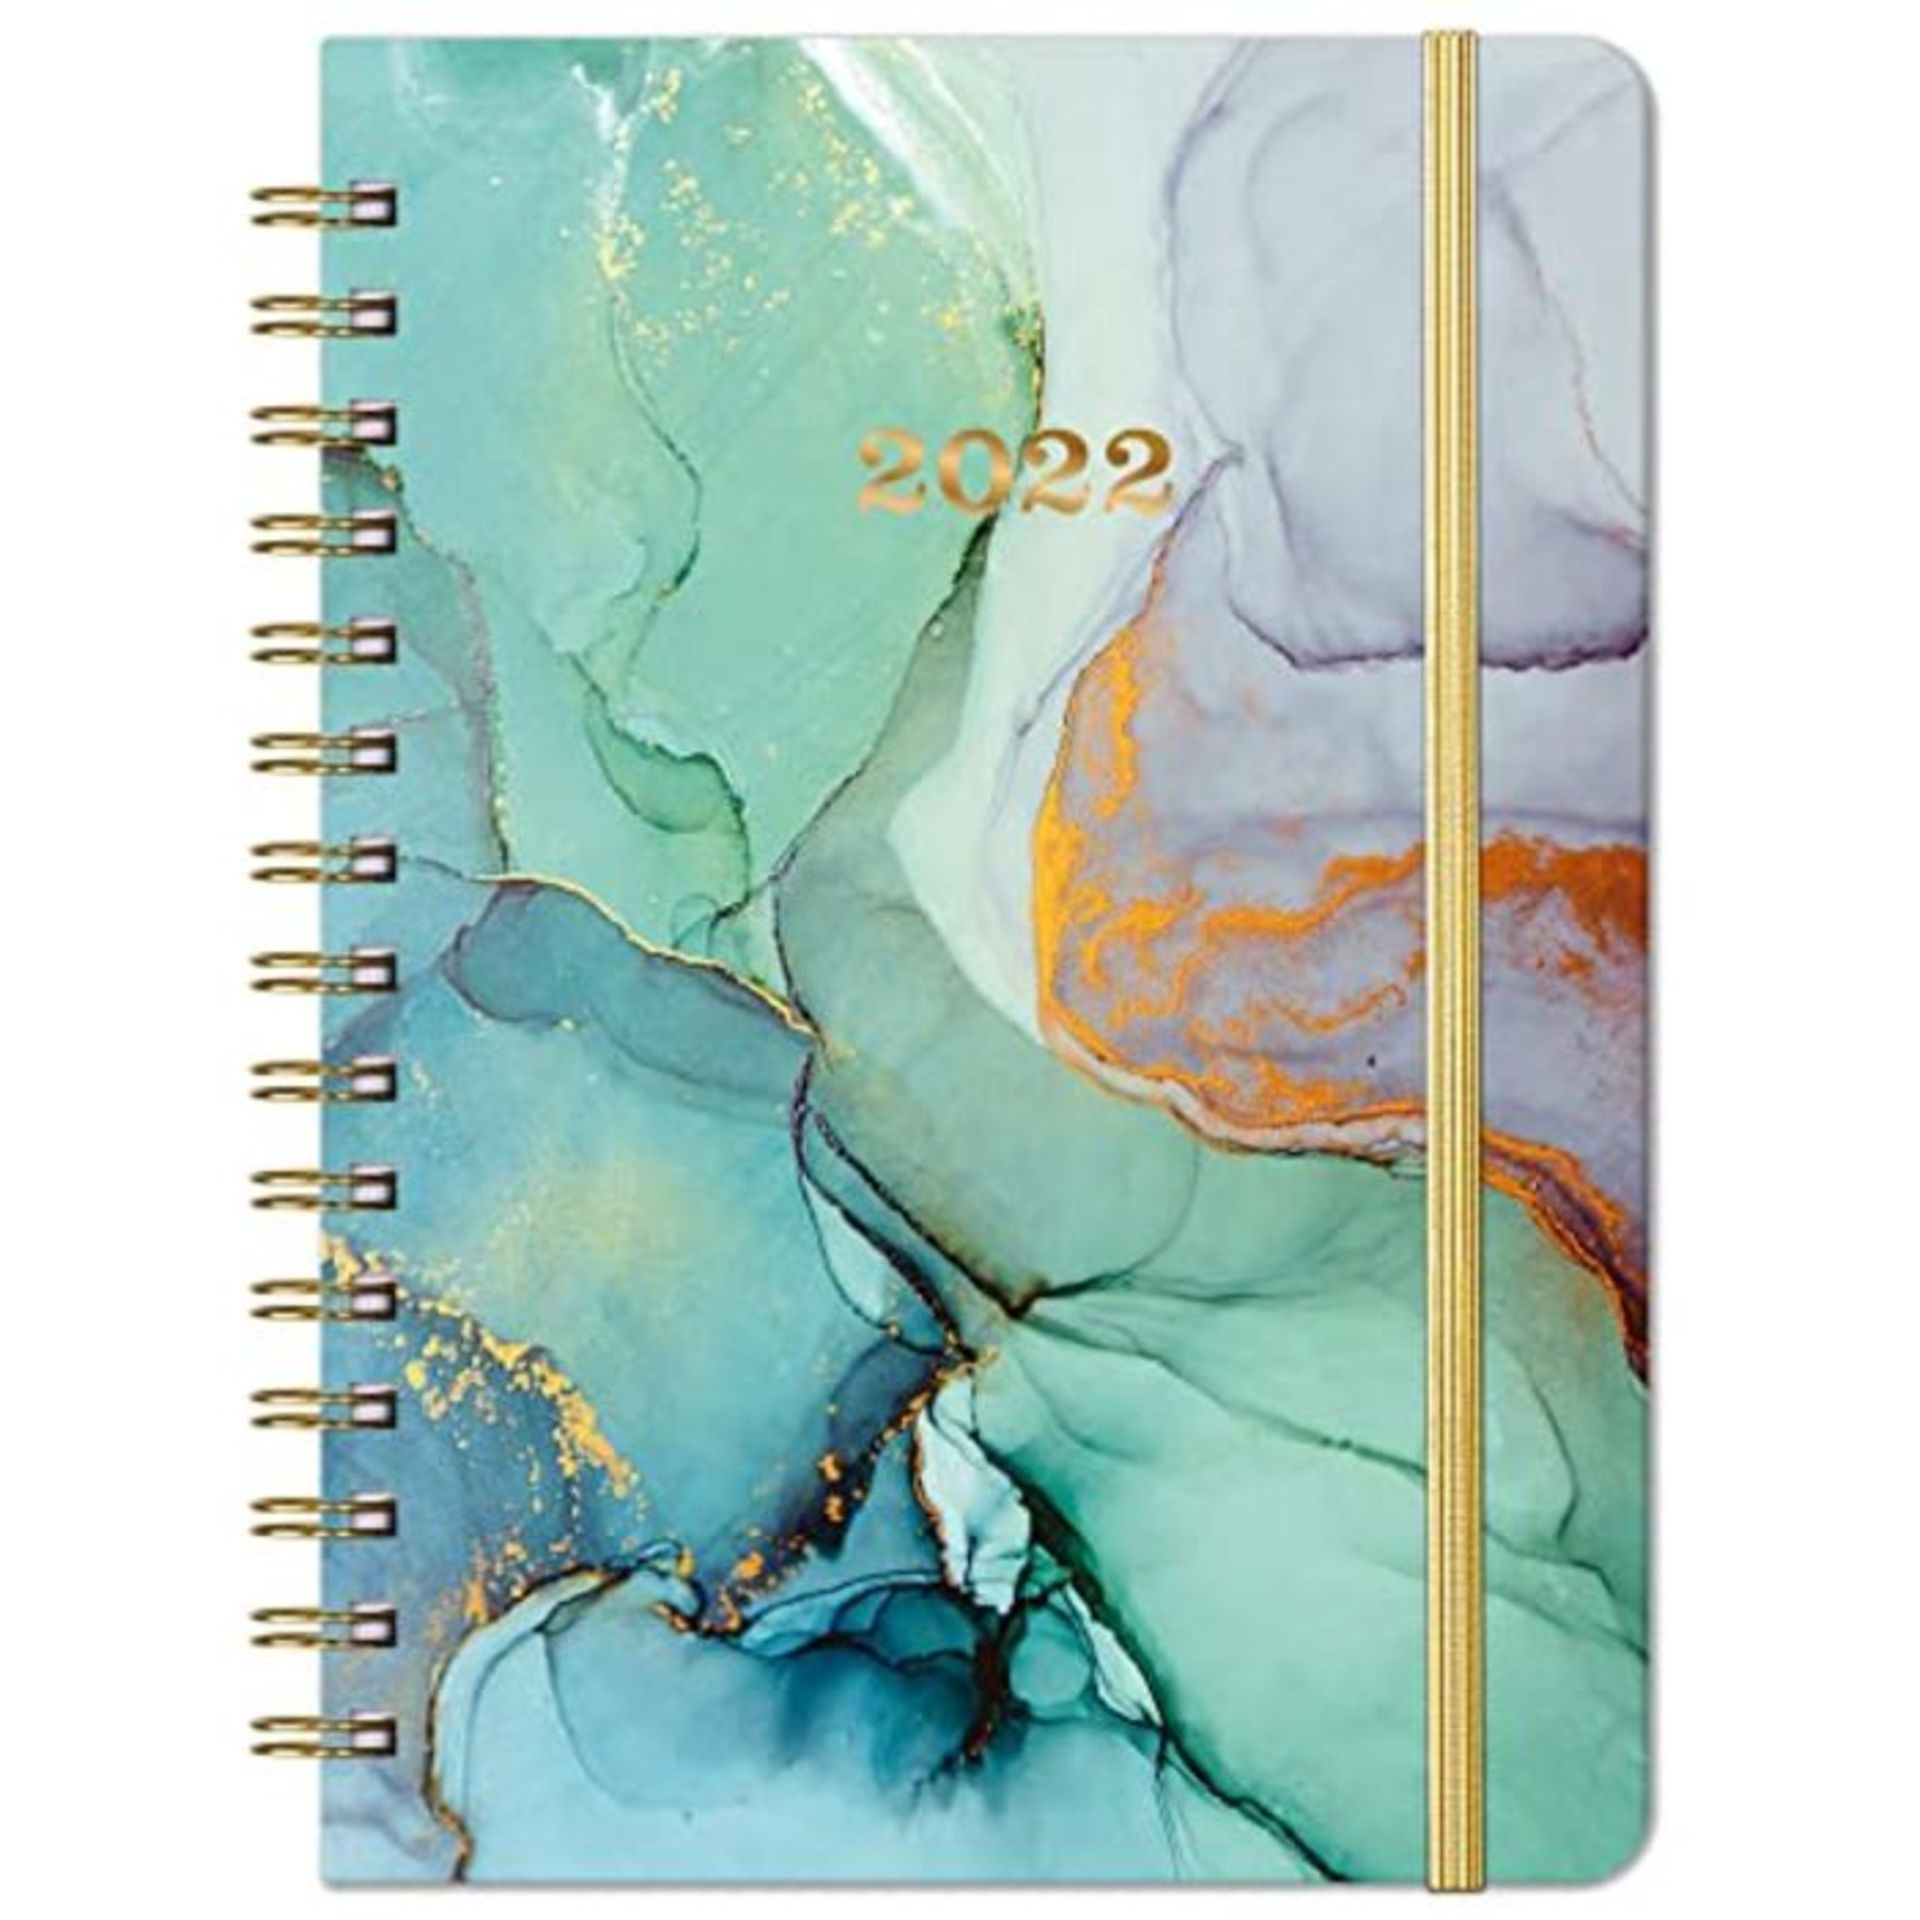 2021-2022 Diary - Weekly & Monthly Diary with Monthly Tabs, 6.3" x 8.4", Jul 2021 - Ju